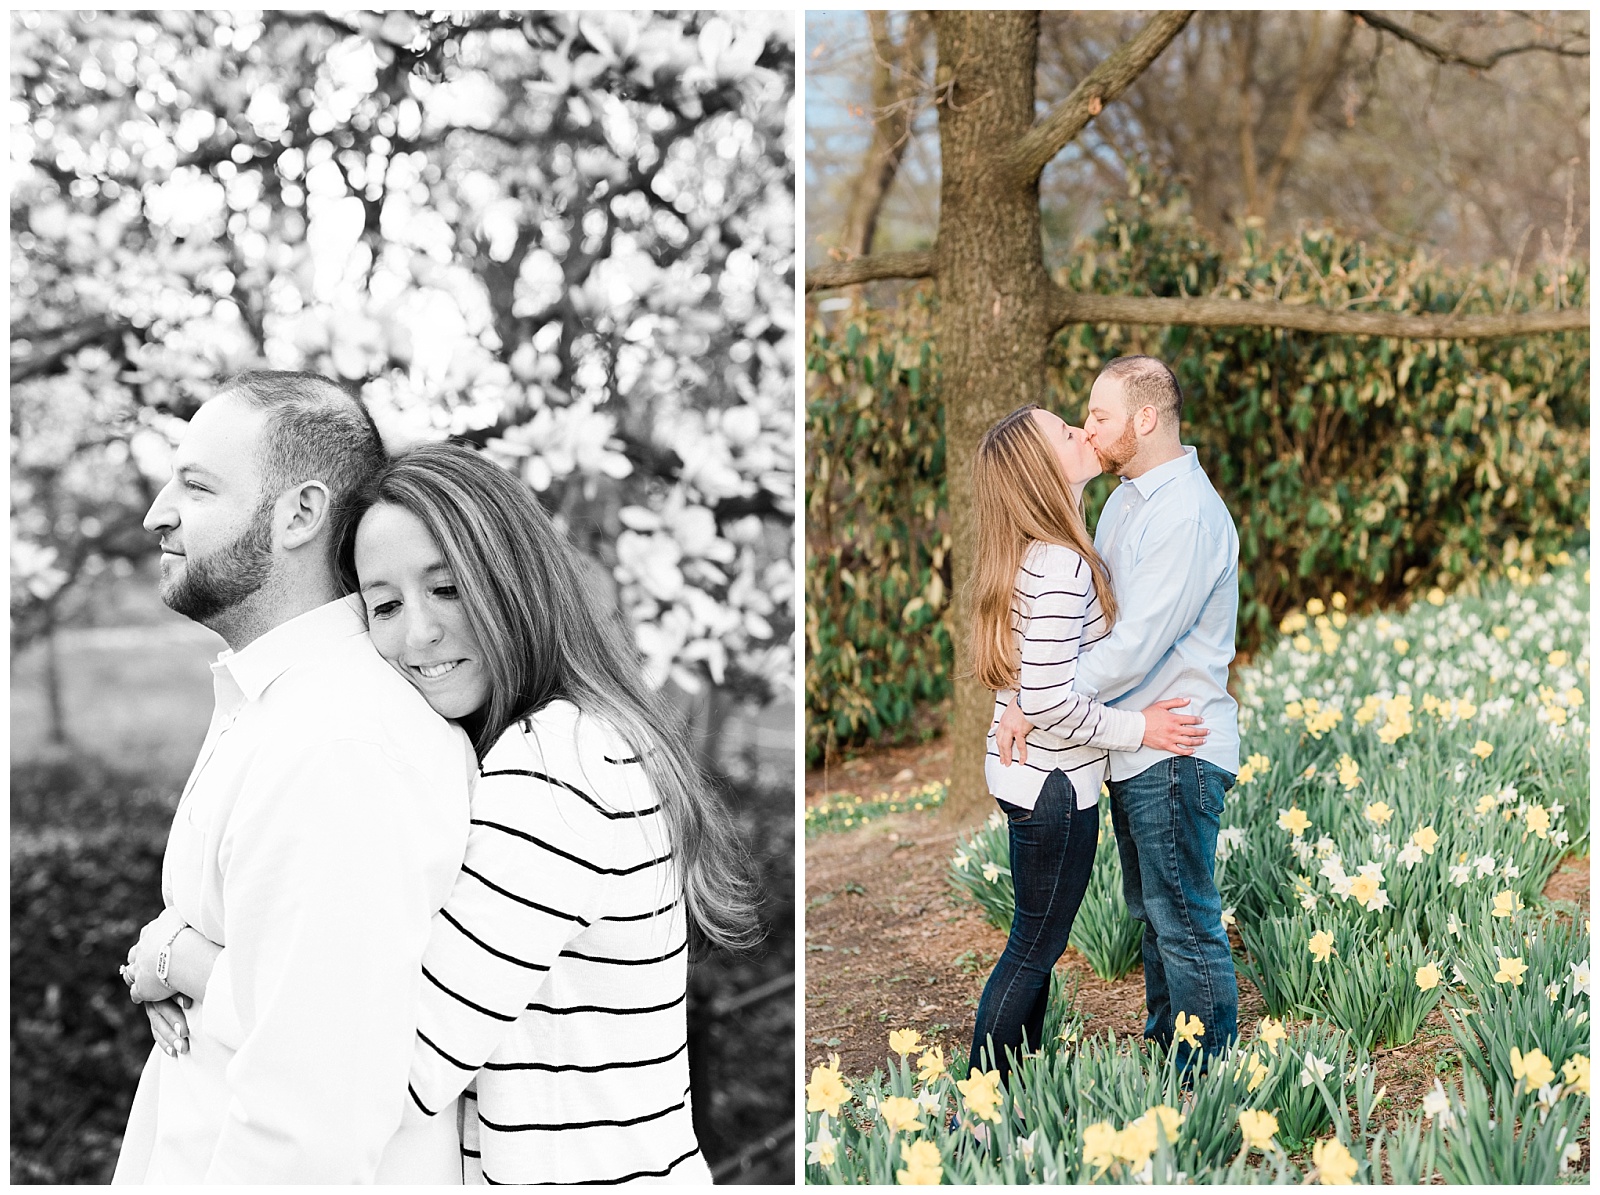 Central Park, NYC engagement session, springtime, wedding photographer, New York, flowers, tulips